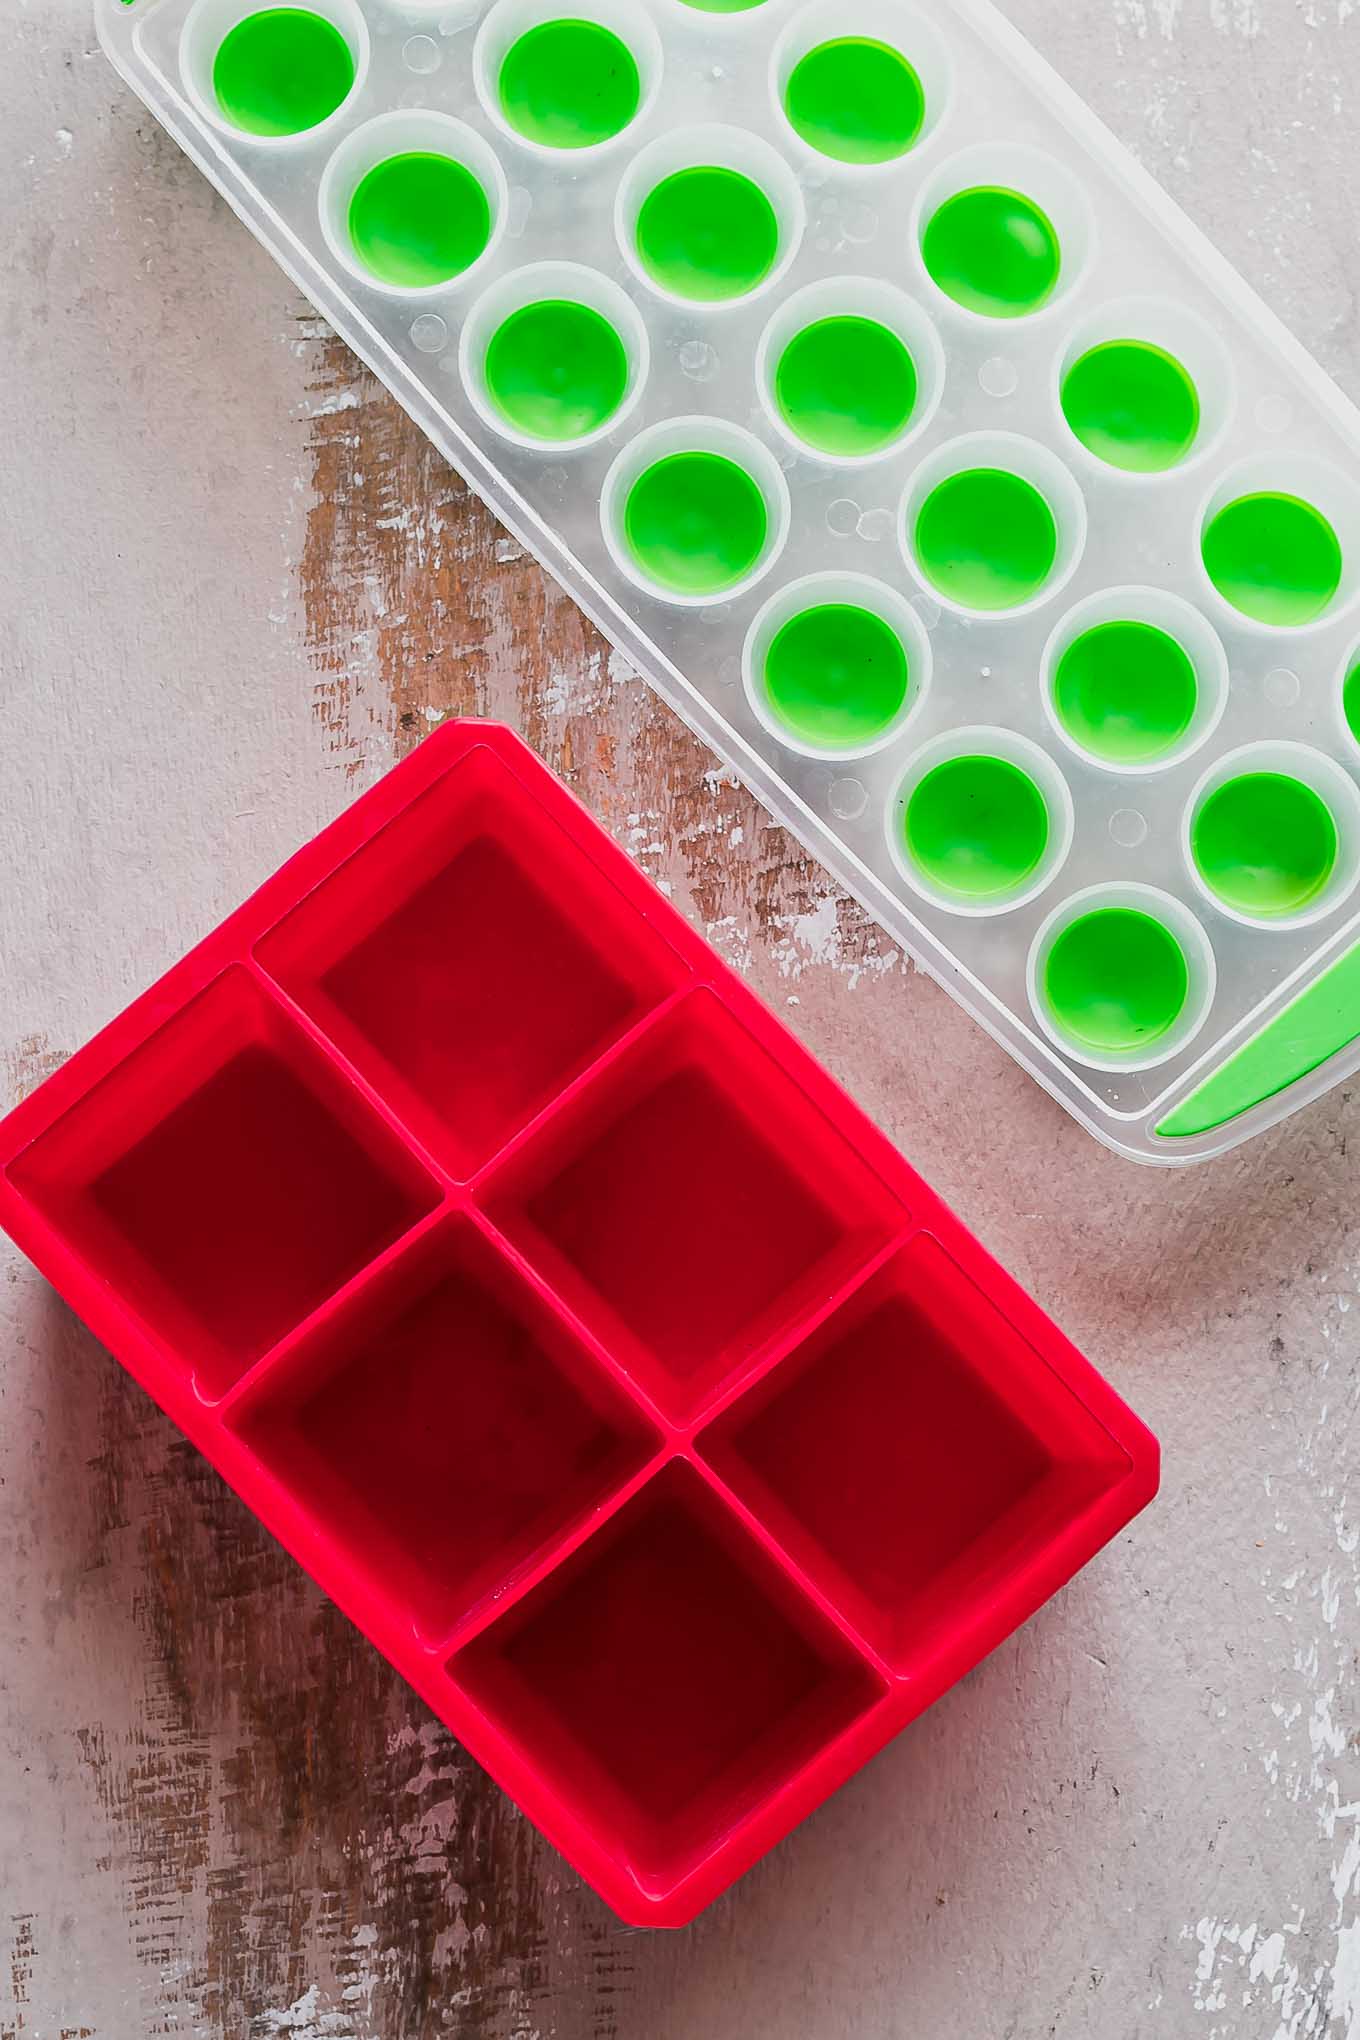 https://www.forkintheroad.co/wp-content/uploads/2022/05/silicone-ice-trays-eco-friendly-114.jpg